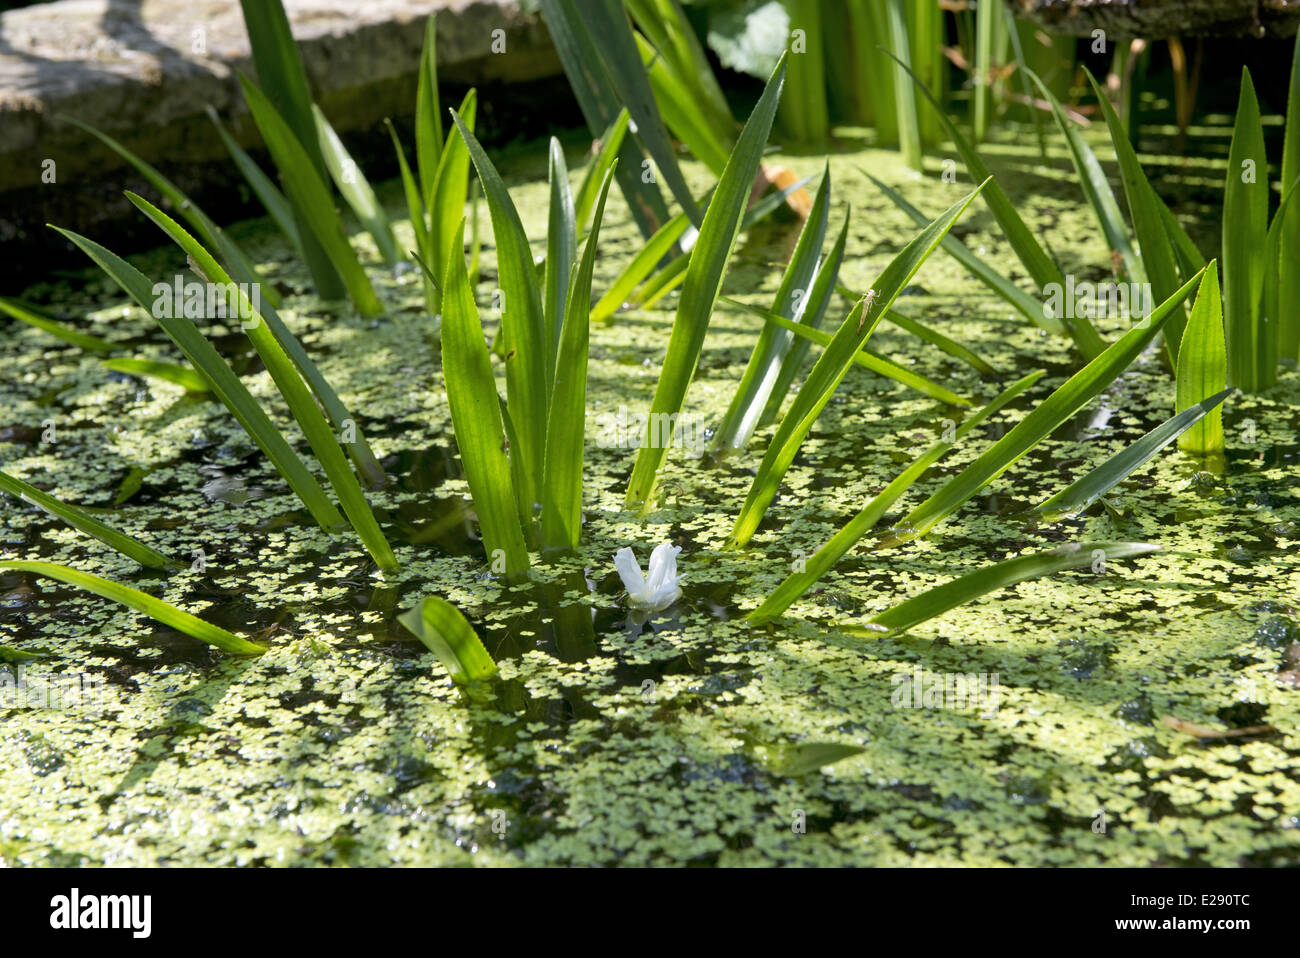 Water soldier, Stratiotes aloides, flowering plants with lesser duckweed in ornamental pond Stock Photo